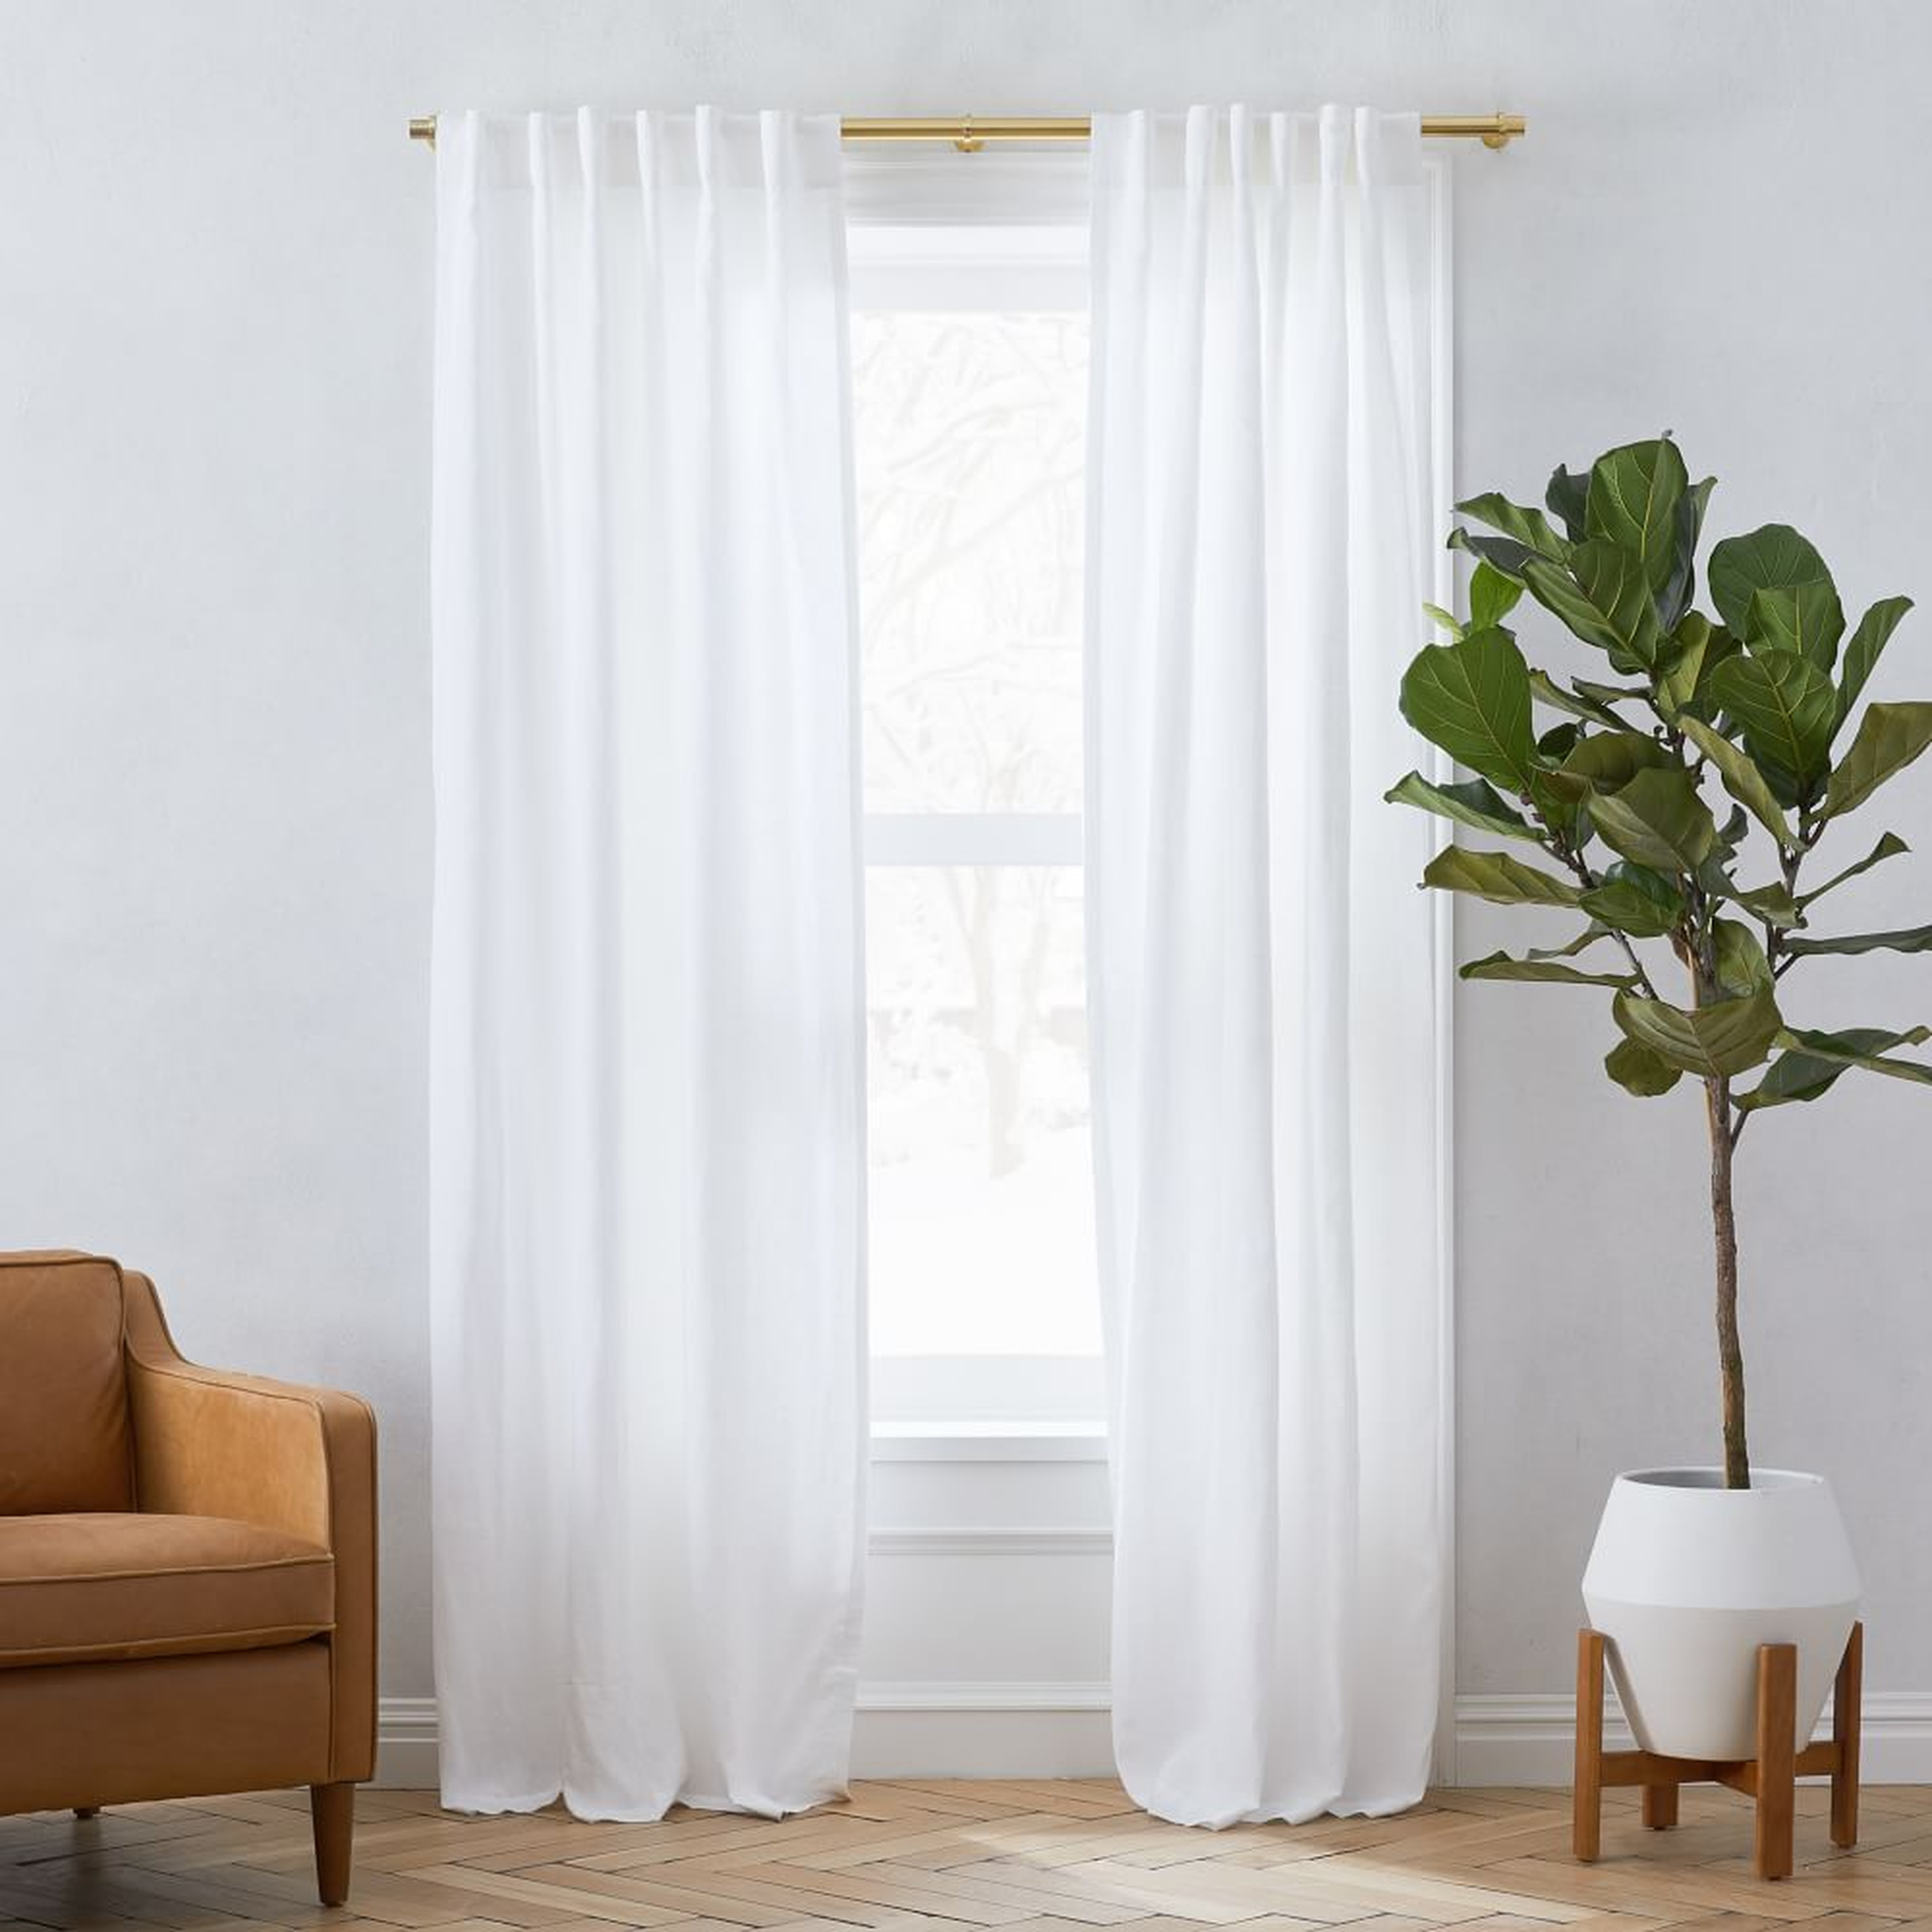 European Flax Linen Curtain with Cotton Lining, White, 48"x96", Set of 2 - West Elm